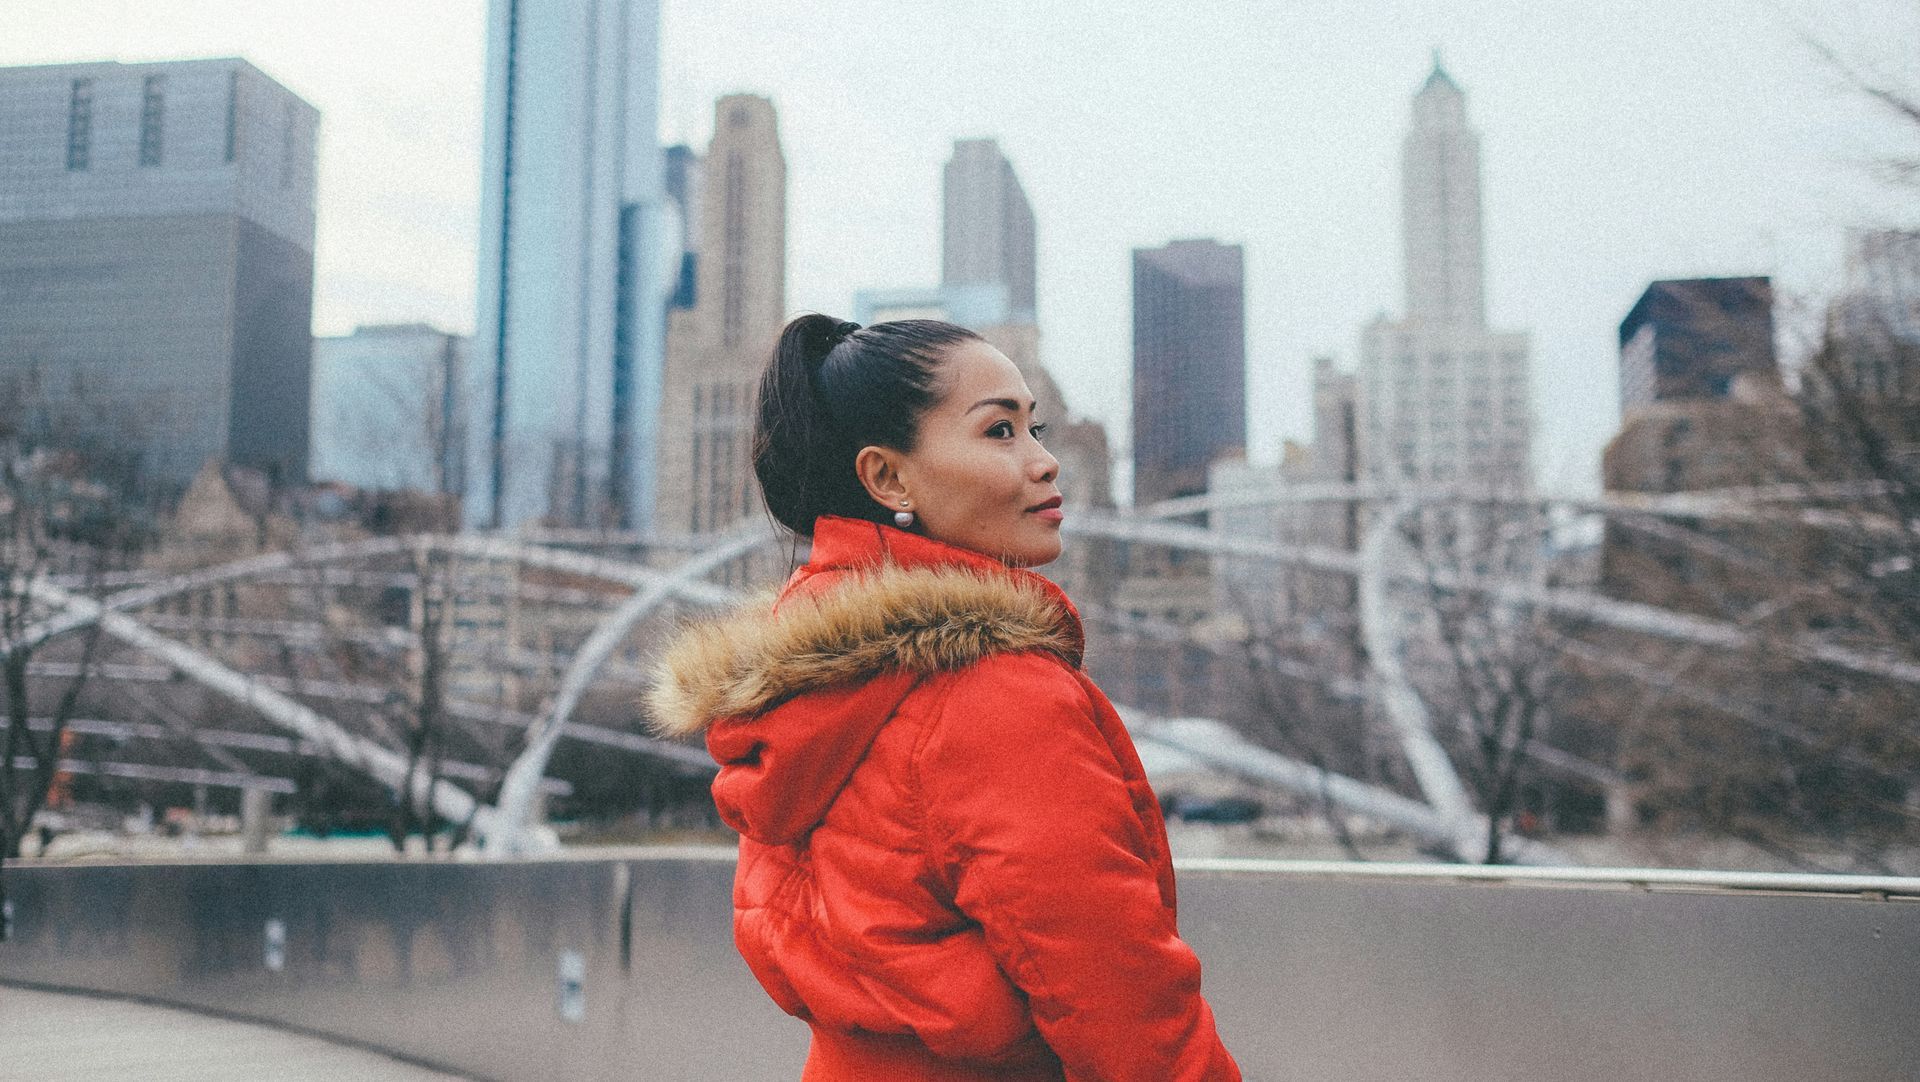 A woman in a red jacket with a fur hood is standing on a bridge in front of a city skyline.